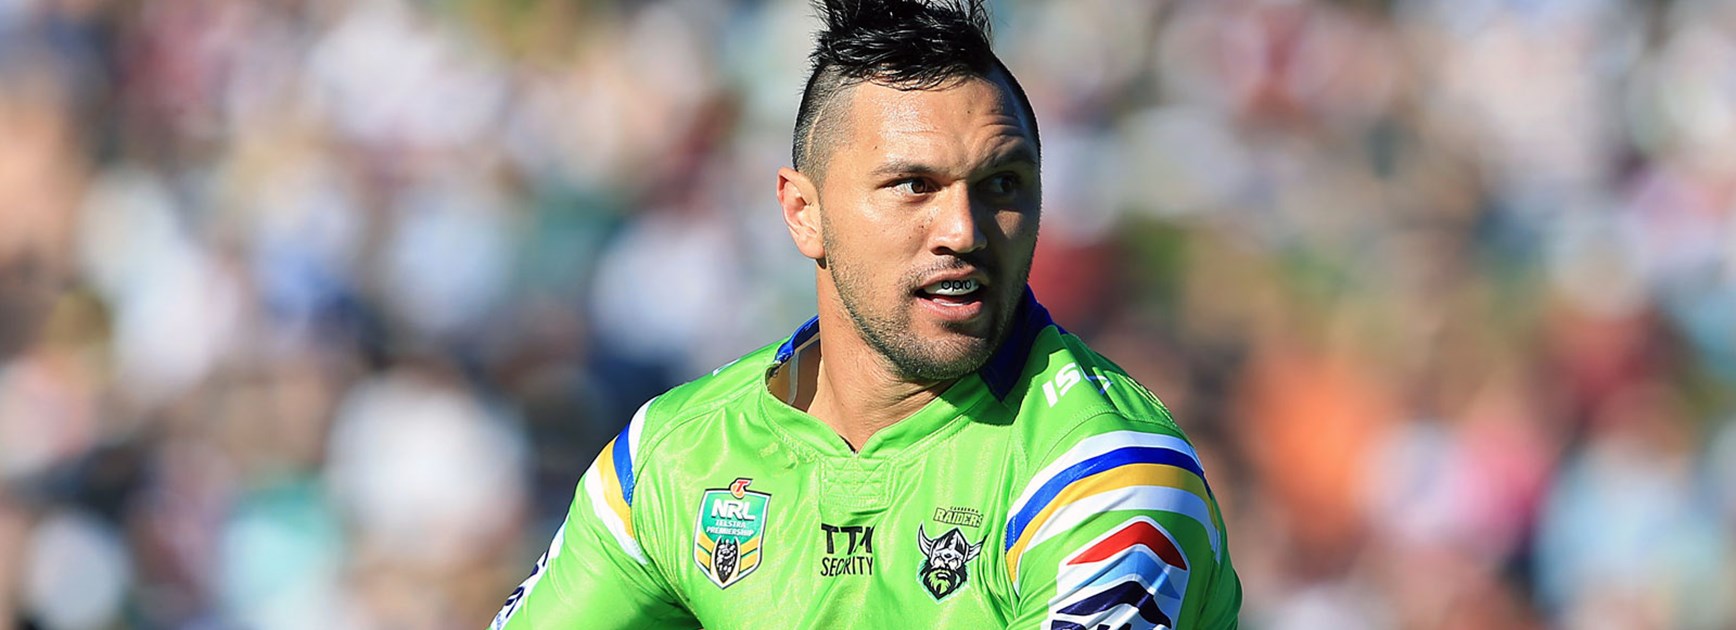 Raiders winger Jordan Rapana has been a shining light for the Green Machine in 2016.